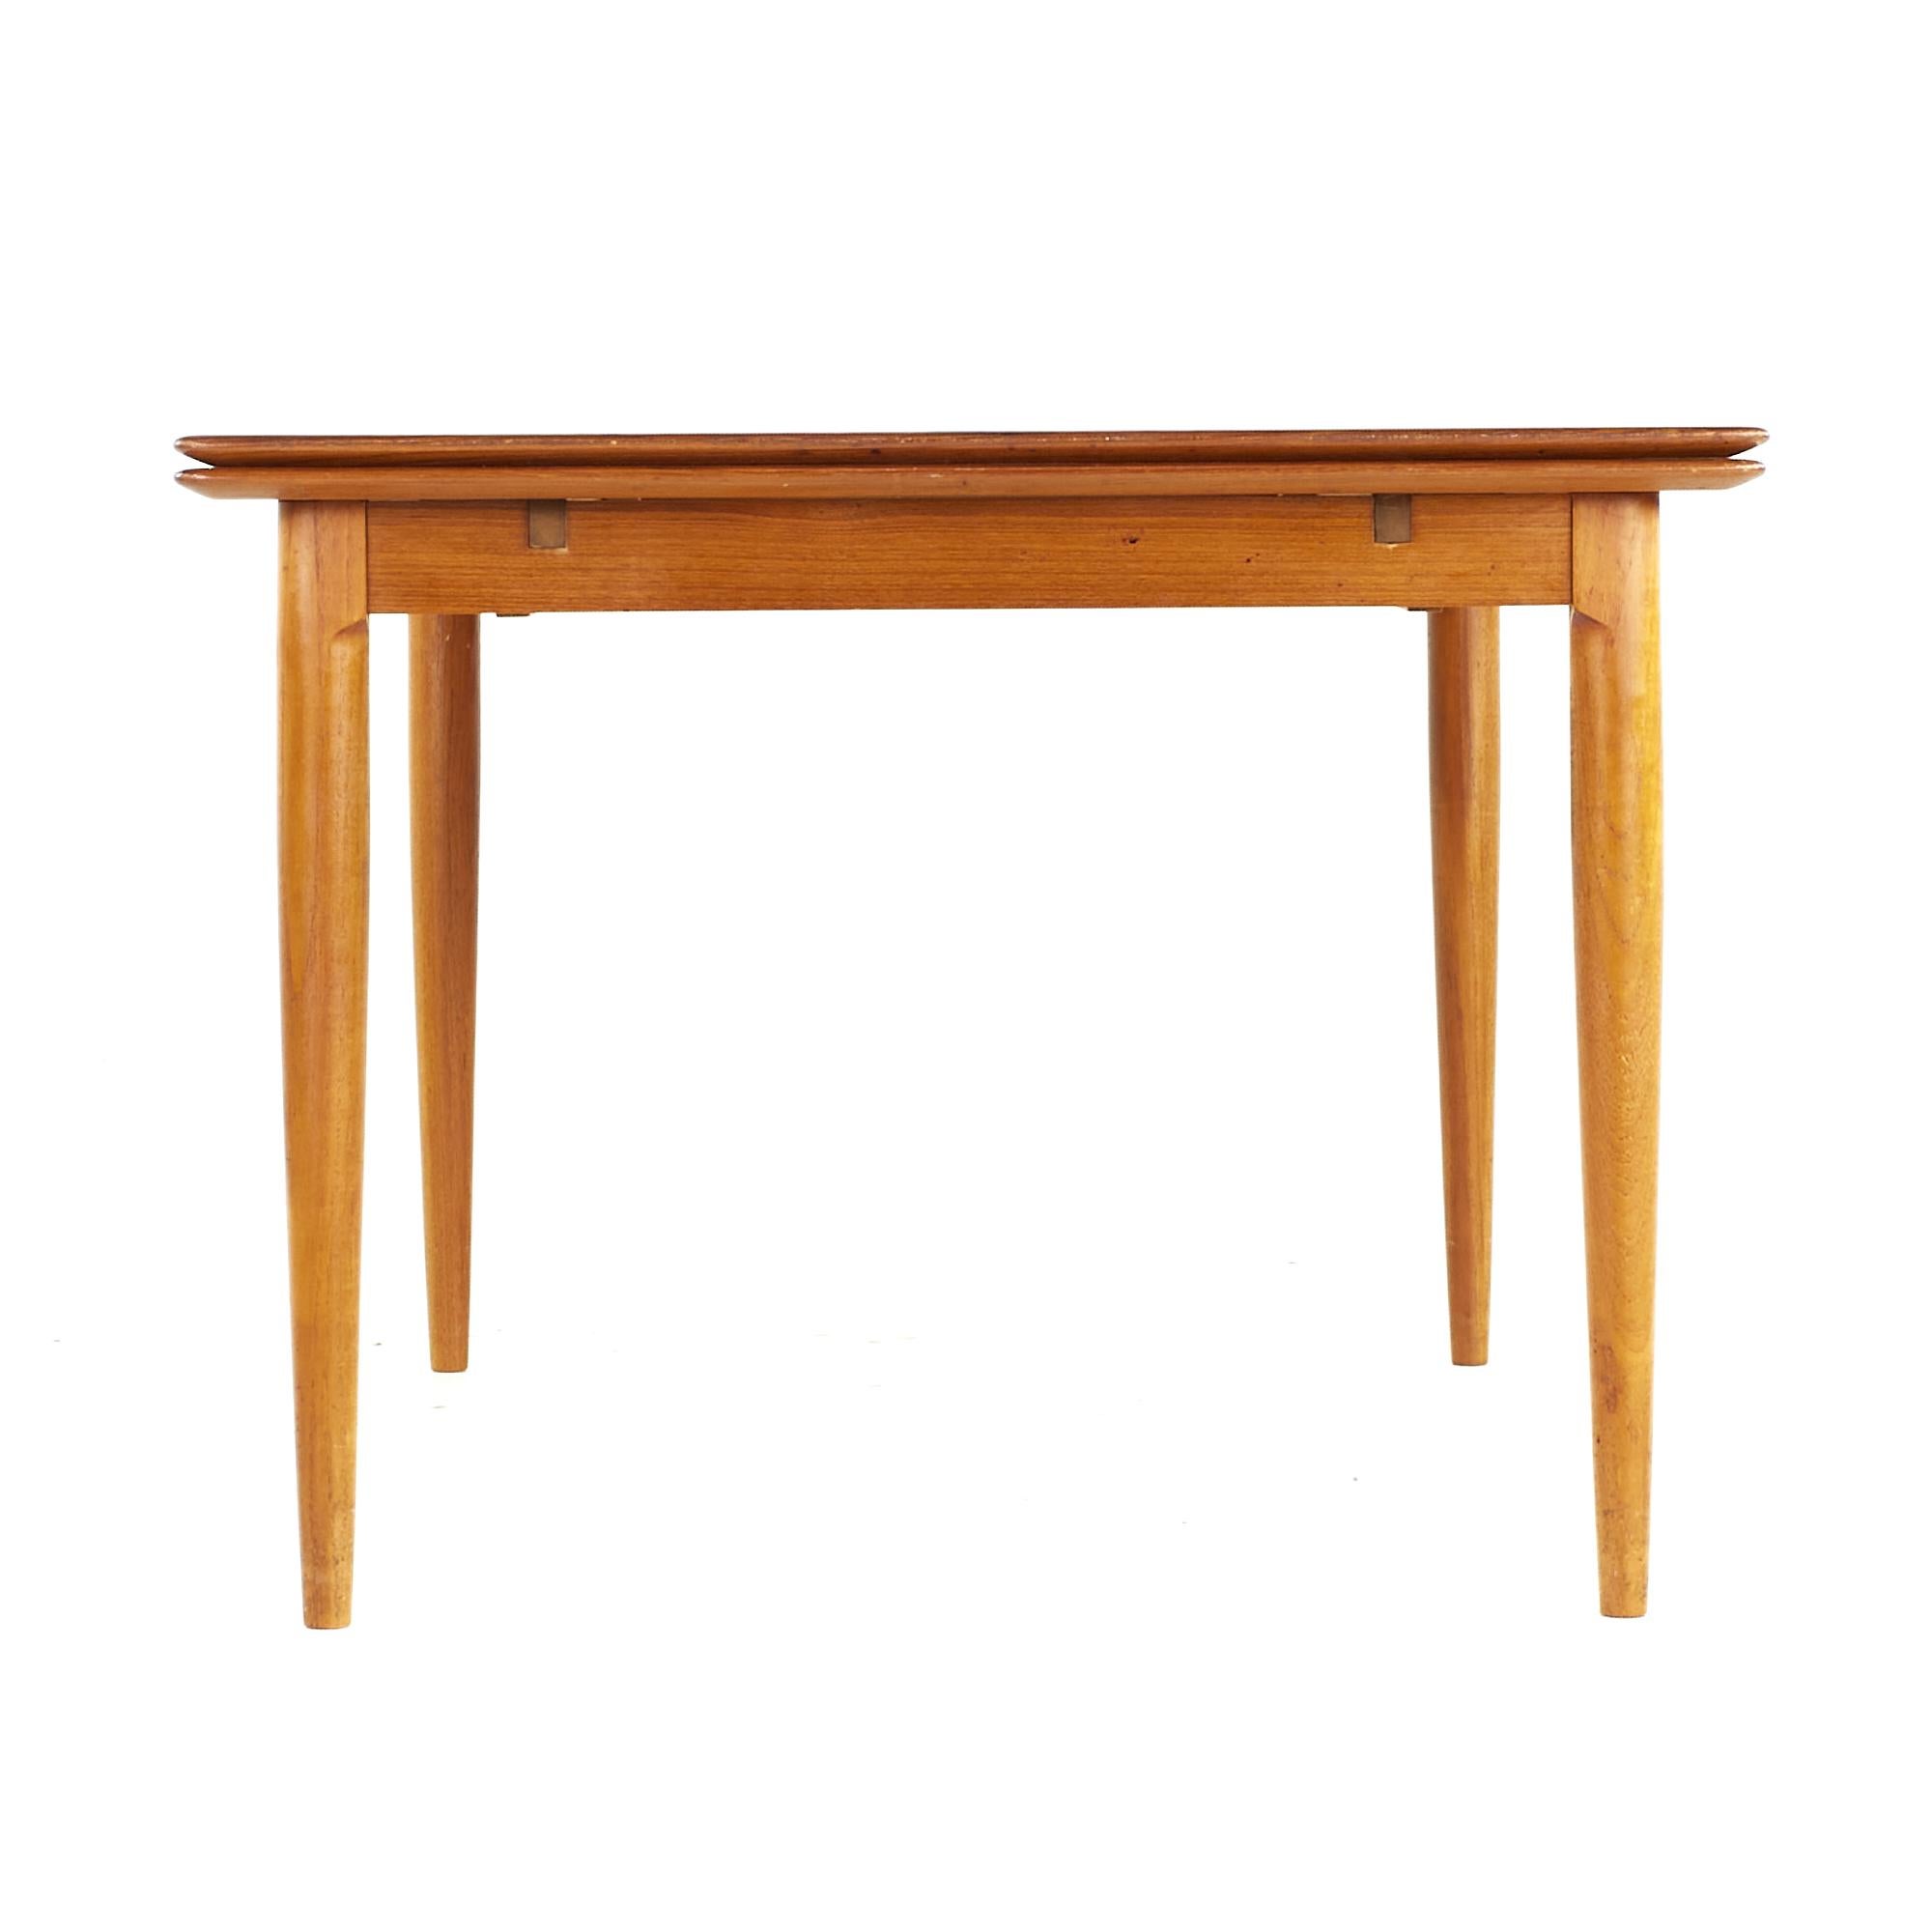 Late 20th Century Kurt Ostervig Style Midcentury Teak Dining Room Table with Hidden Leaves For Sale